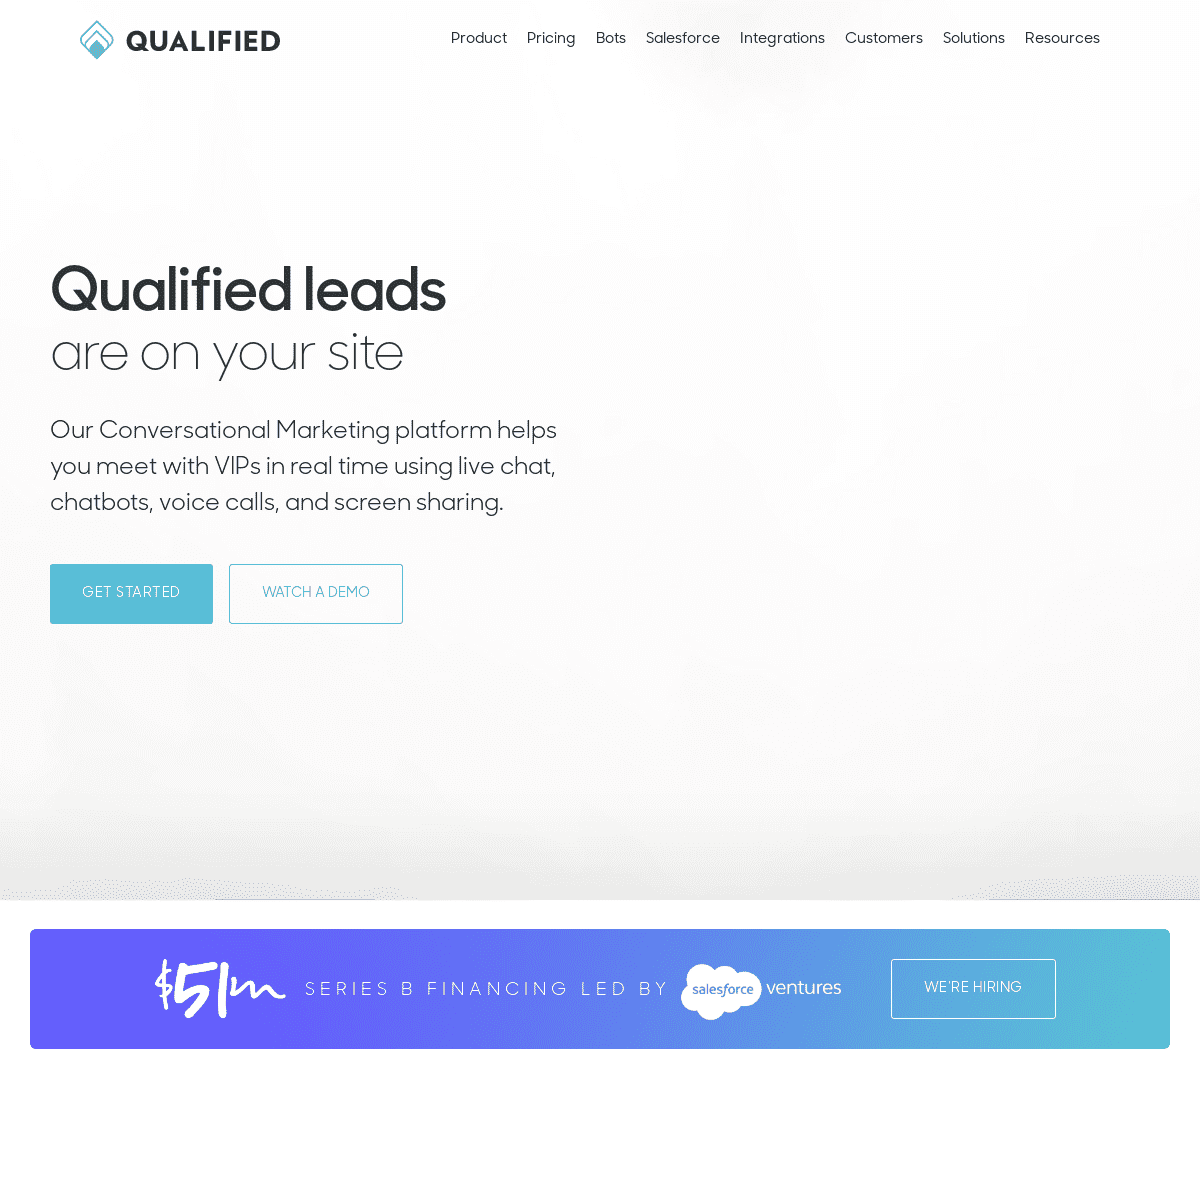 A complete backup of https://qualified.com